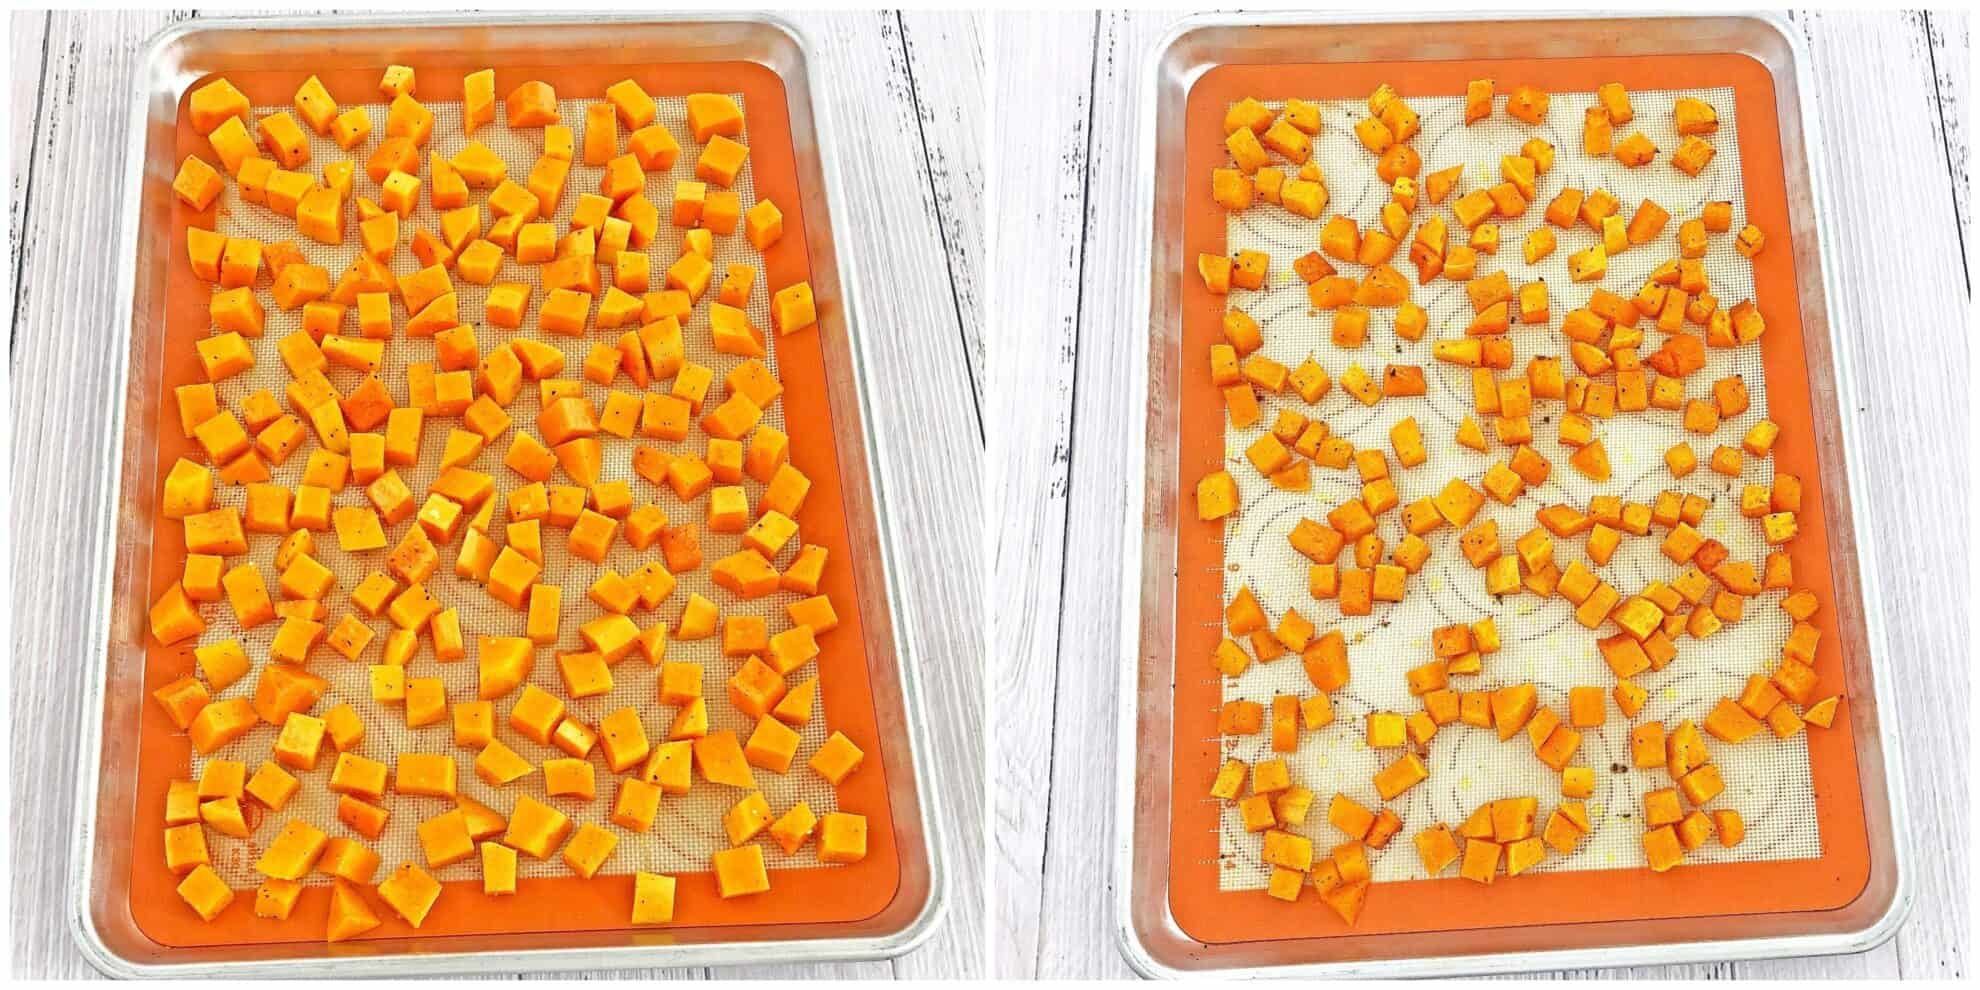 Easy Roasted Butternut Squash Recipe is very nutritious, tasty, and quick to make. Another fall staple, and a must-have at your Thanksgiving gathering. It’s beautiful and deep color that matches the season to decorate your table, and it’s delicious, smooth taste and texture. #organicbutternutsquash #roastedbutternutsquash #fallcooking #valyastasteofhome